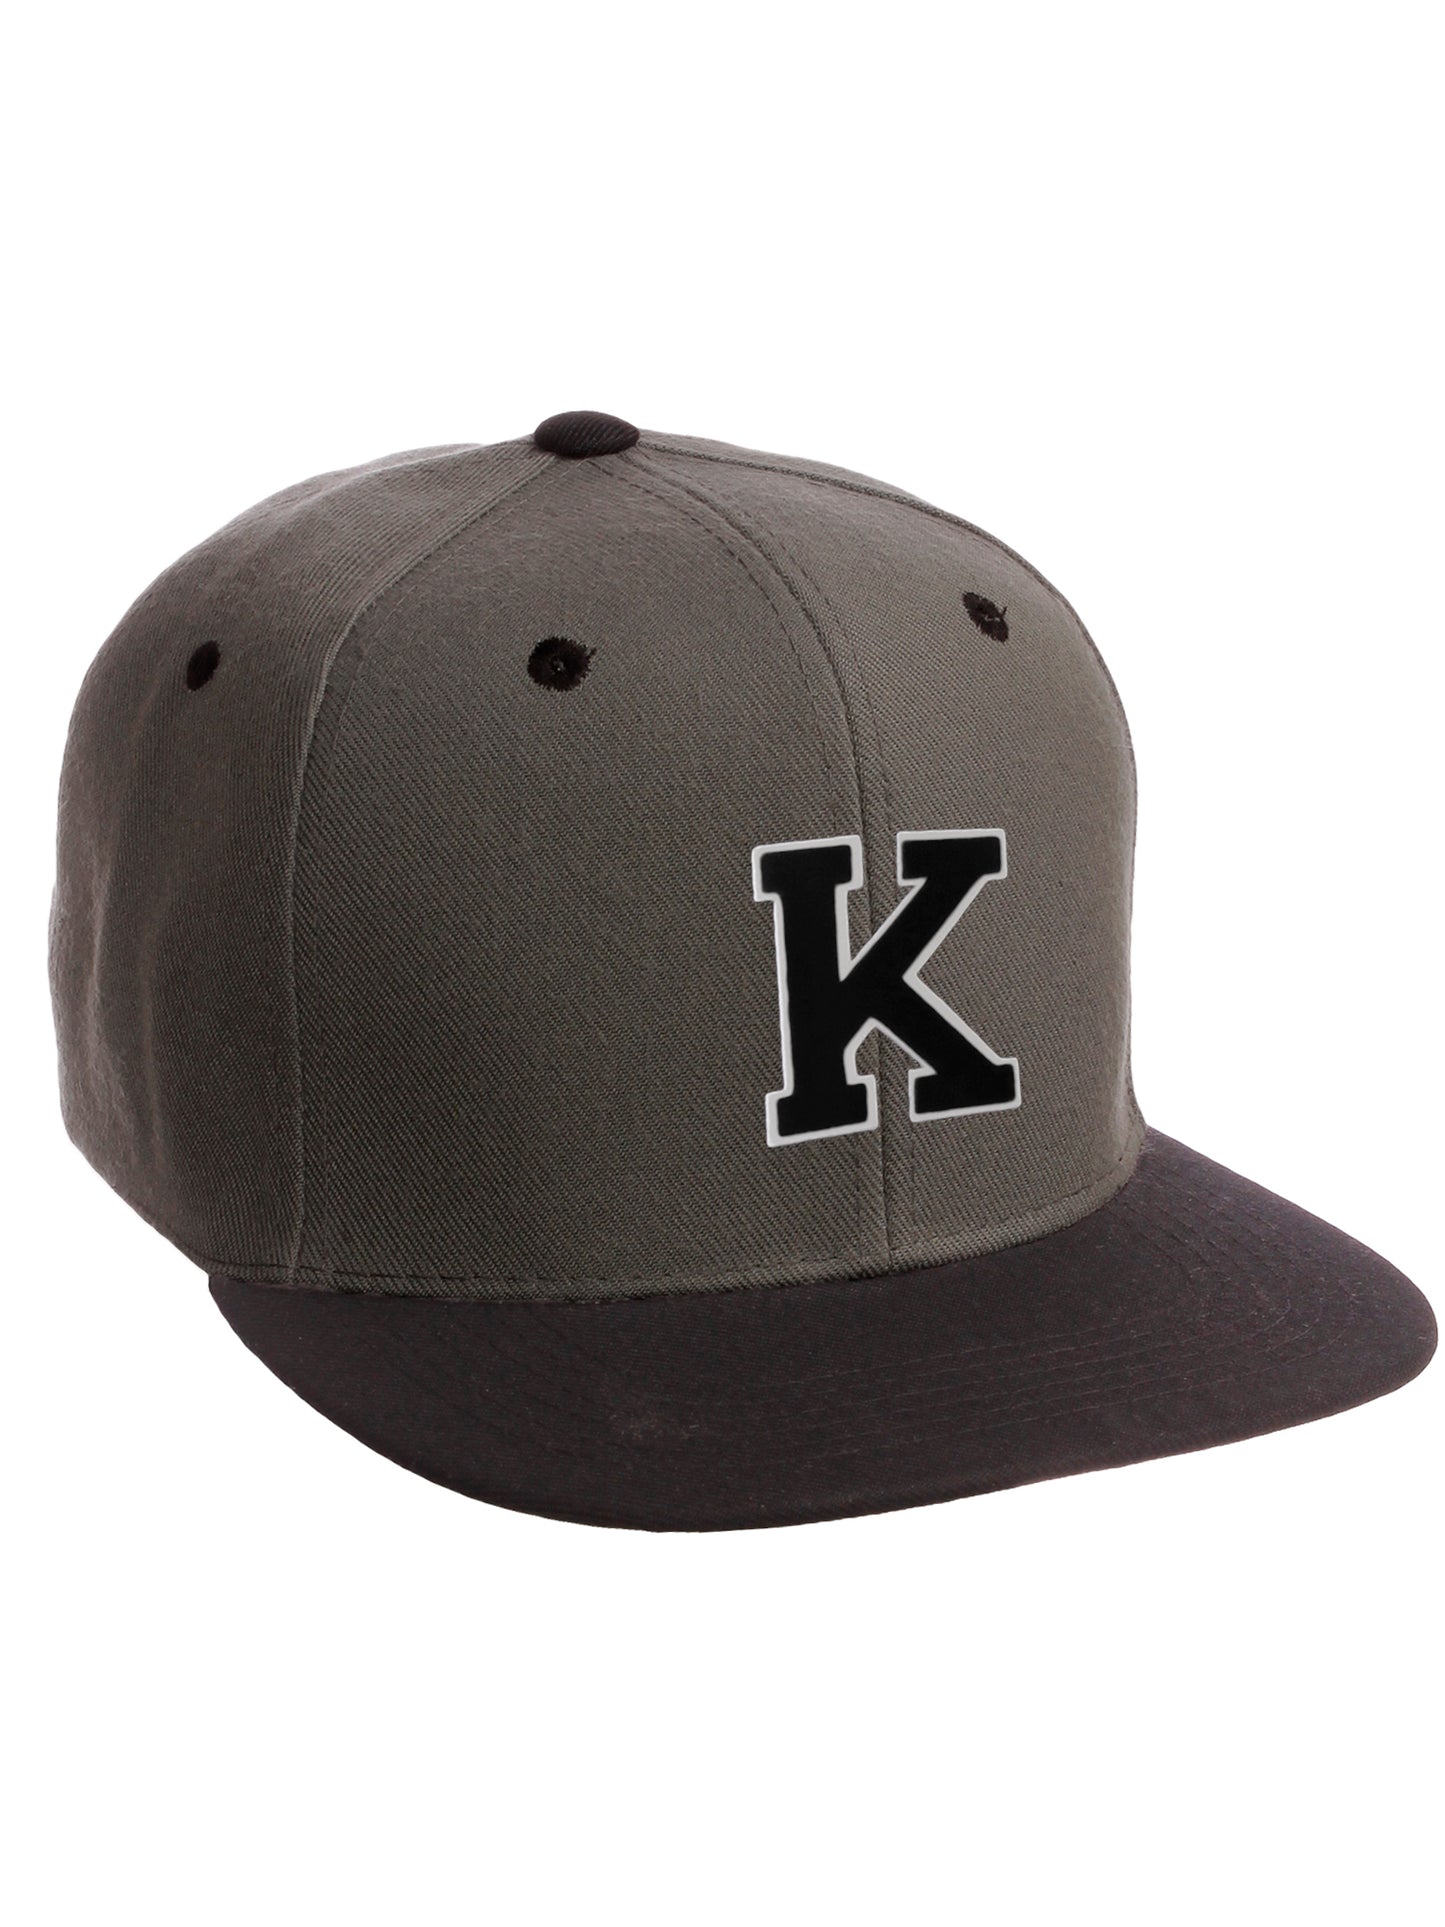 Classic Snapback Hat Custom A to Z Initial Letters, Charcoal Black Cap Wht Blk